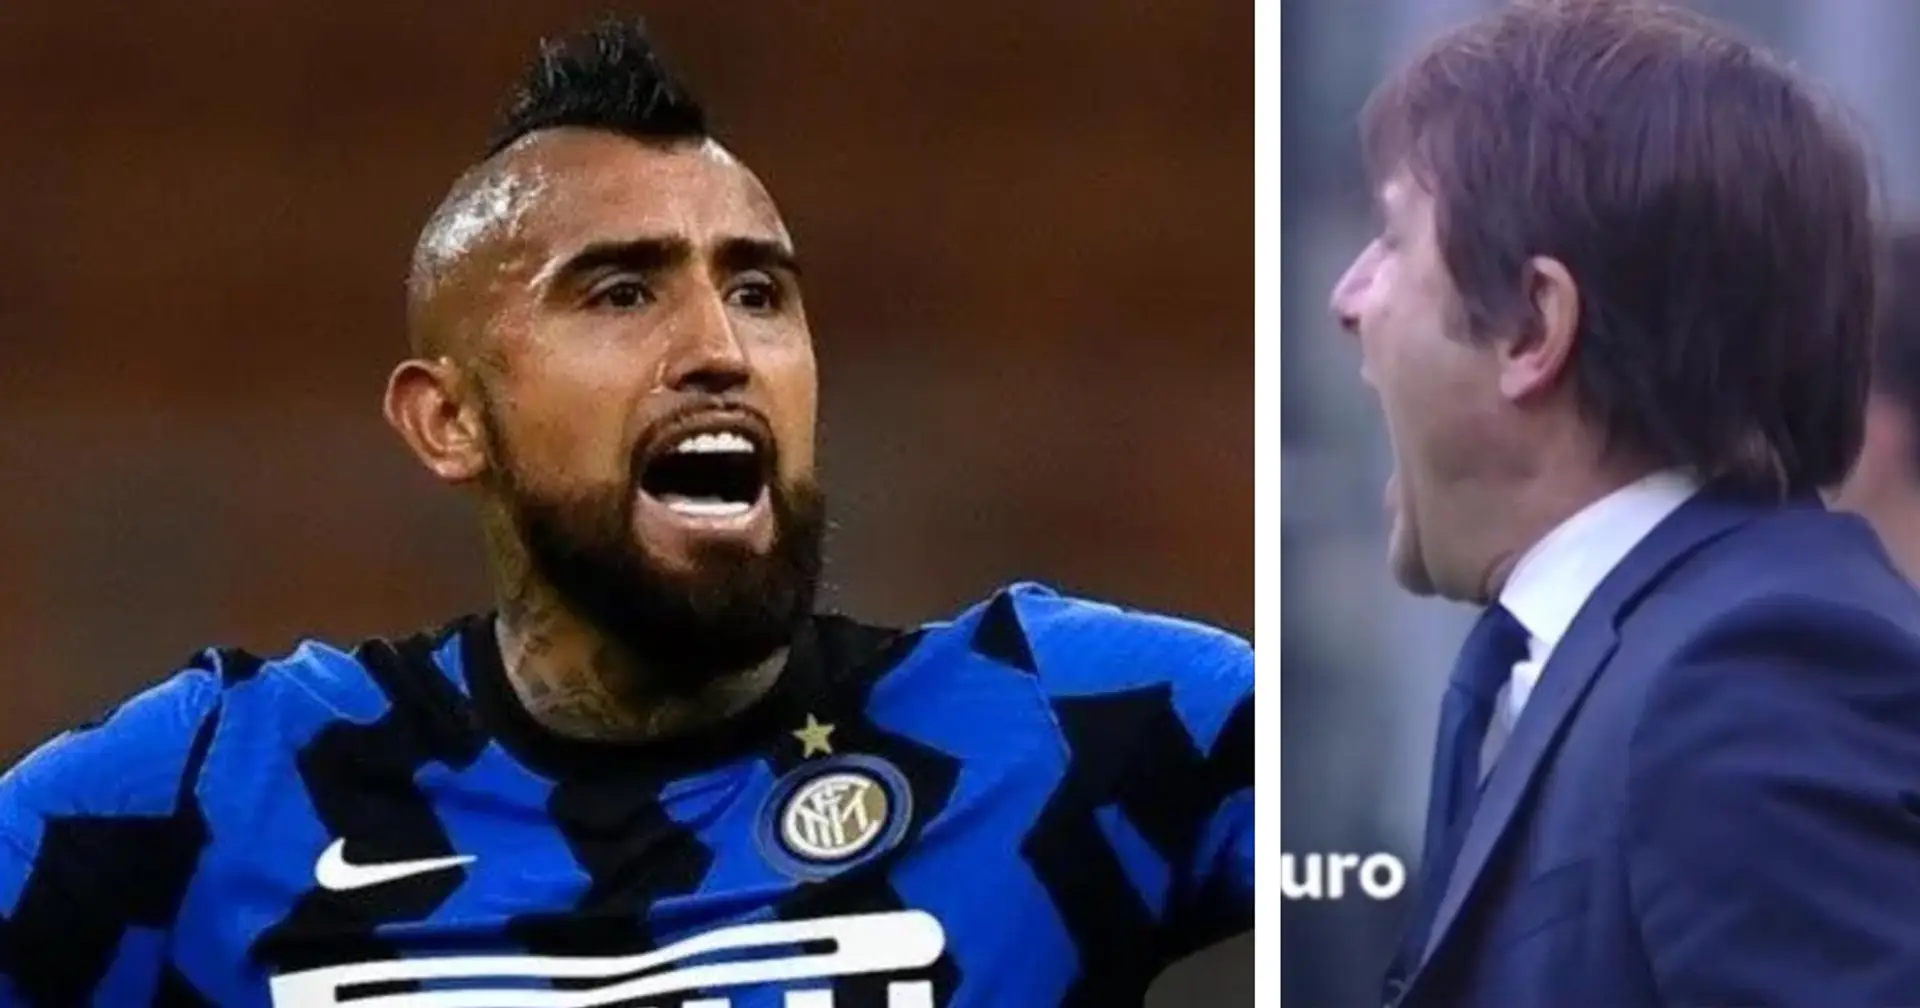 'Arturo, play and f*** off!': Antonio Conte publicly slams Vidal for protesting to referee 